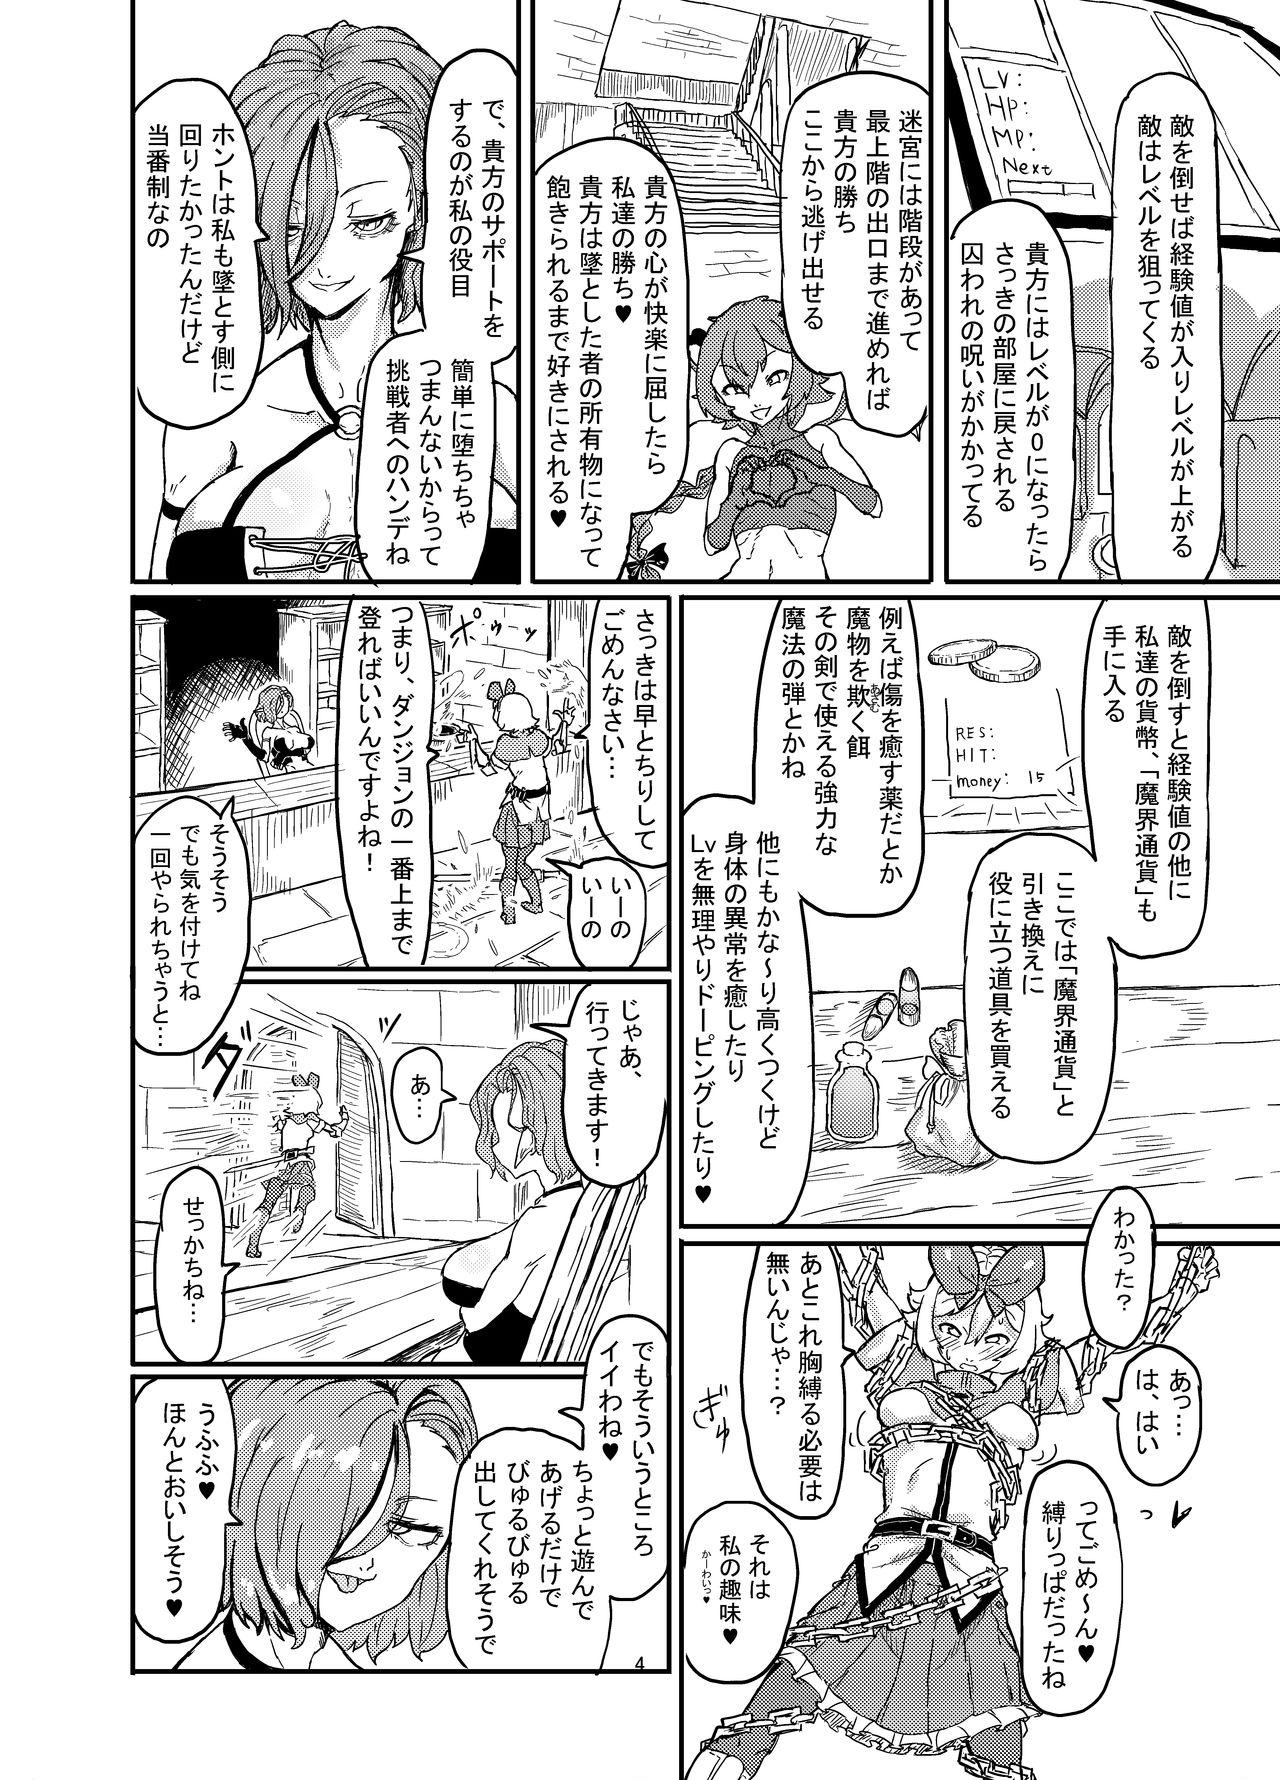 Doll Futanari Mahou Shoujo Sword Lily in Inma Dungeon - Original Best Blowjobs Ever - Page 5